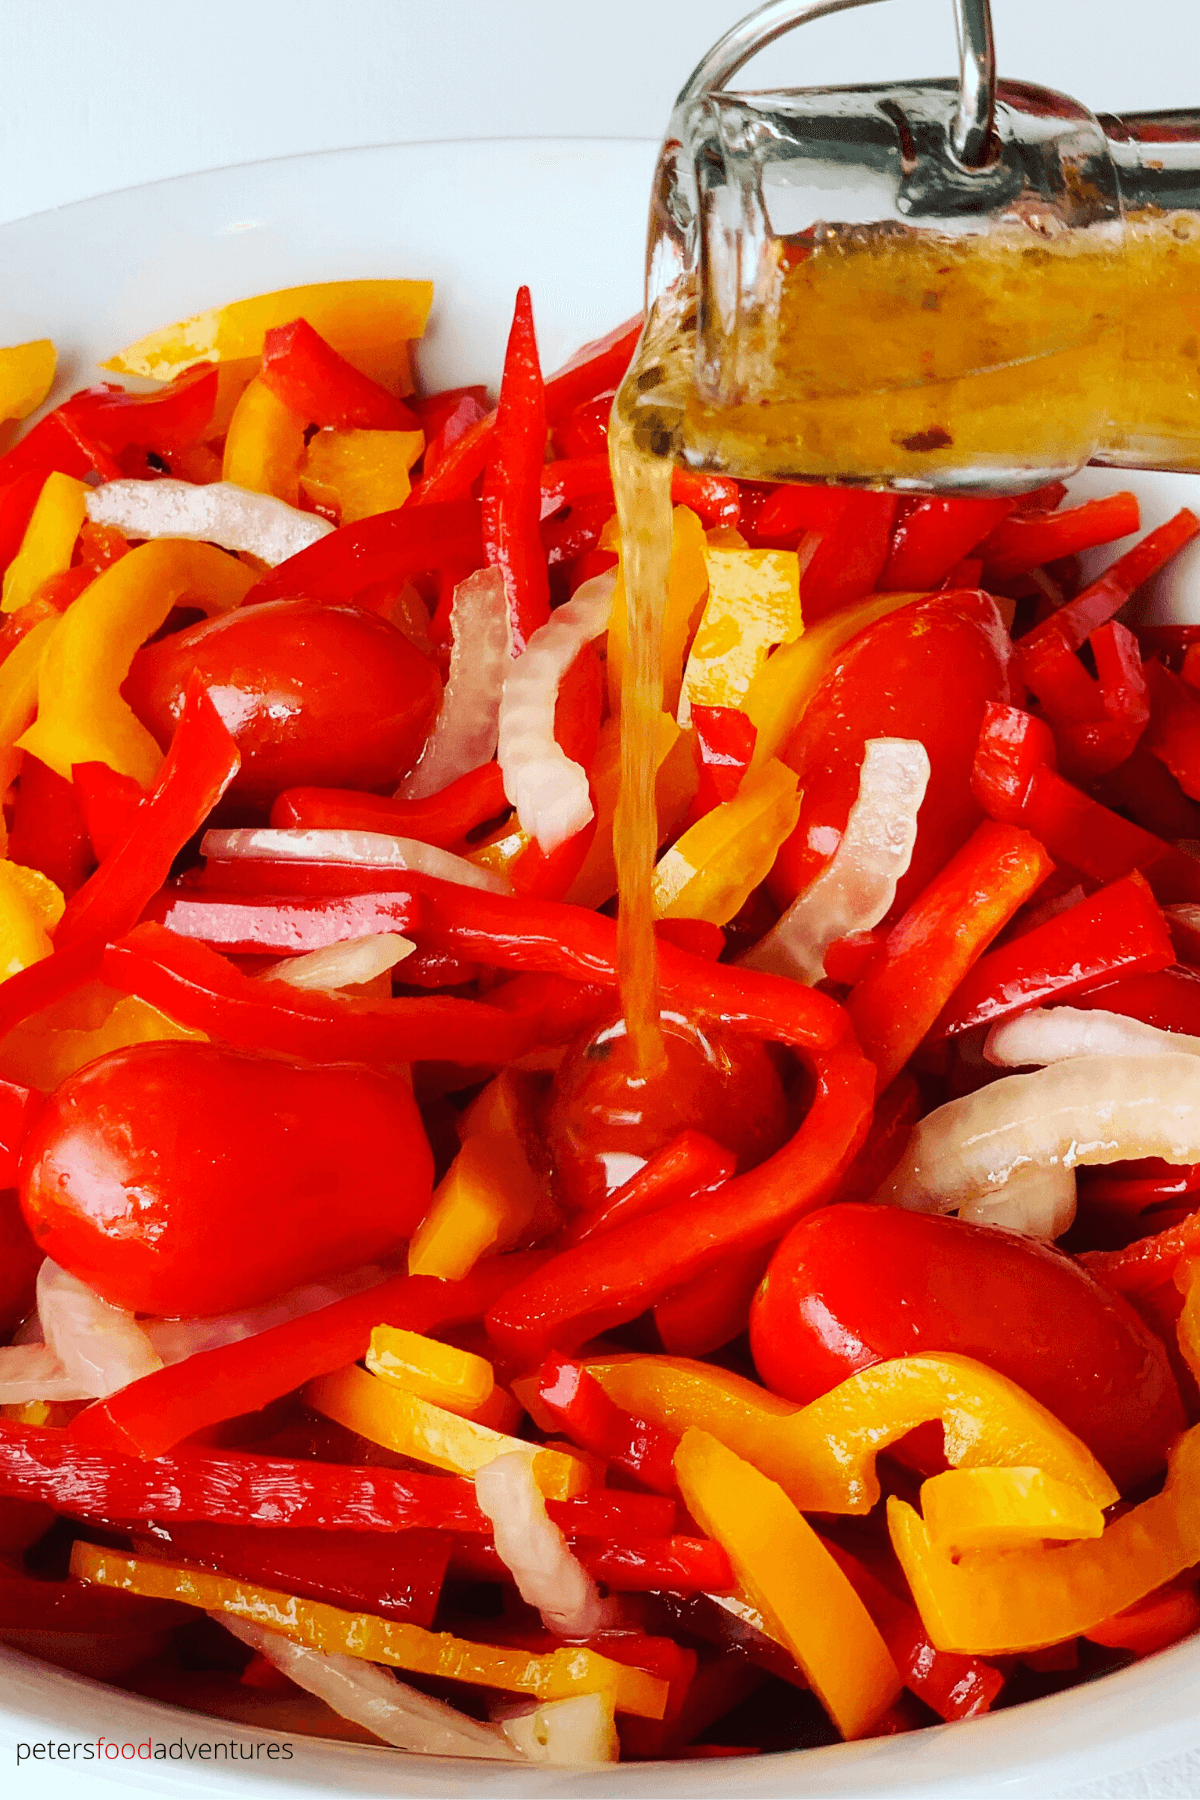 I like making this easy summer salad for long weekend bbq’s or potlucks. Not the usual salad that people make, but super tasty and full of vitamins and antioxidants. It’s an easy bell pepper recipes the whole family will love.